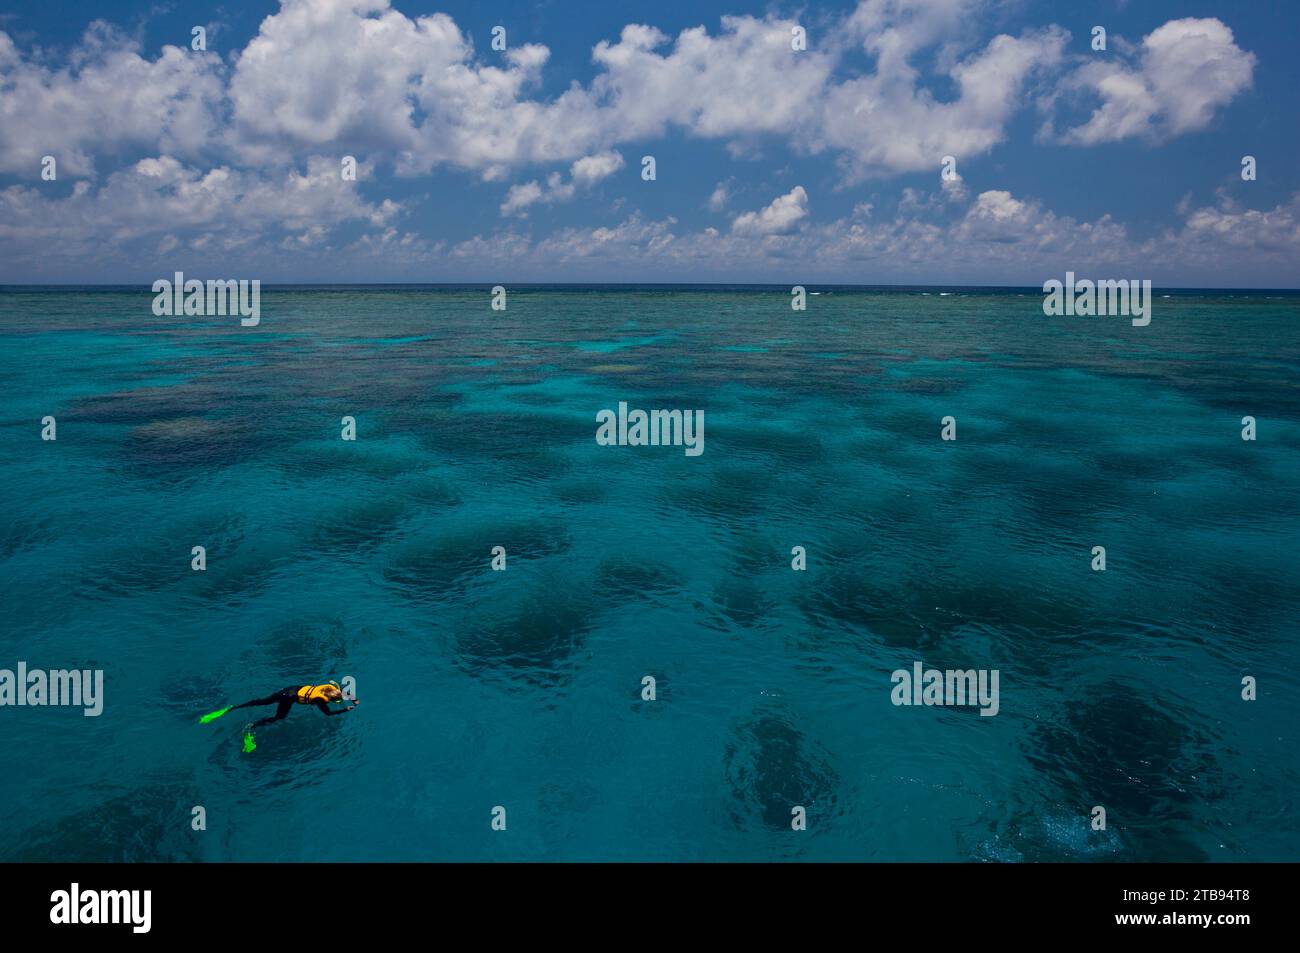 Lone snorkeler on the water at the Great Barrier Reef; Great Barrier Reef, Australia Stock Photo